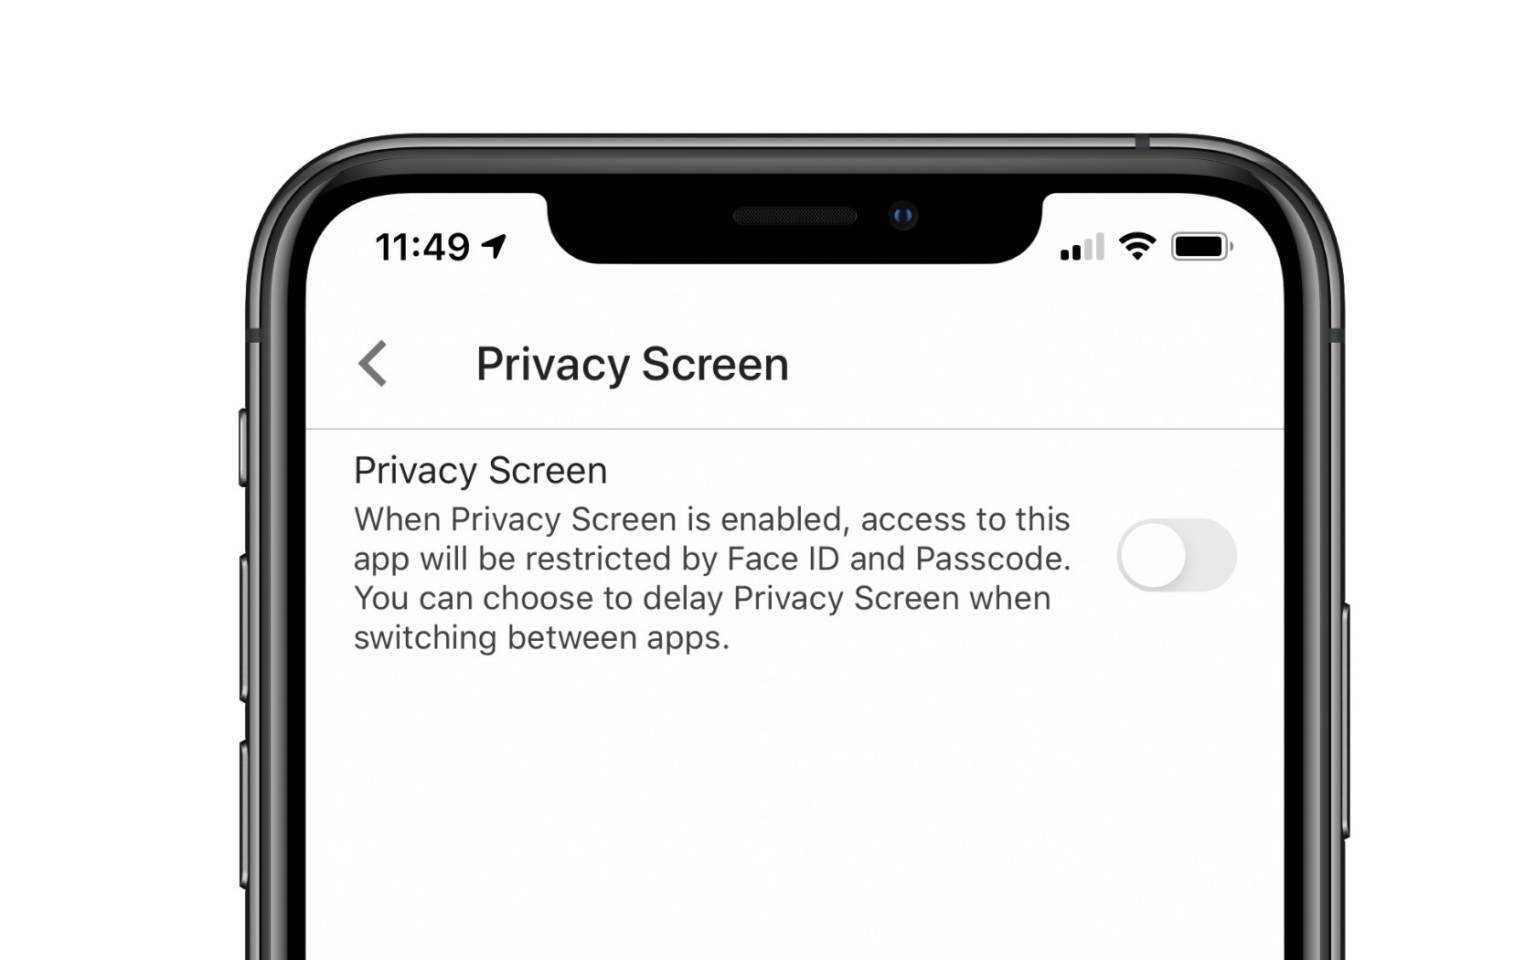 Privacy Screen can be delayed when multitasking - Google Drive on iPhone and iPad gets an extra layer of protection